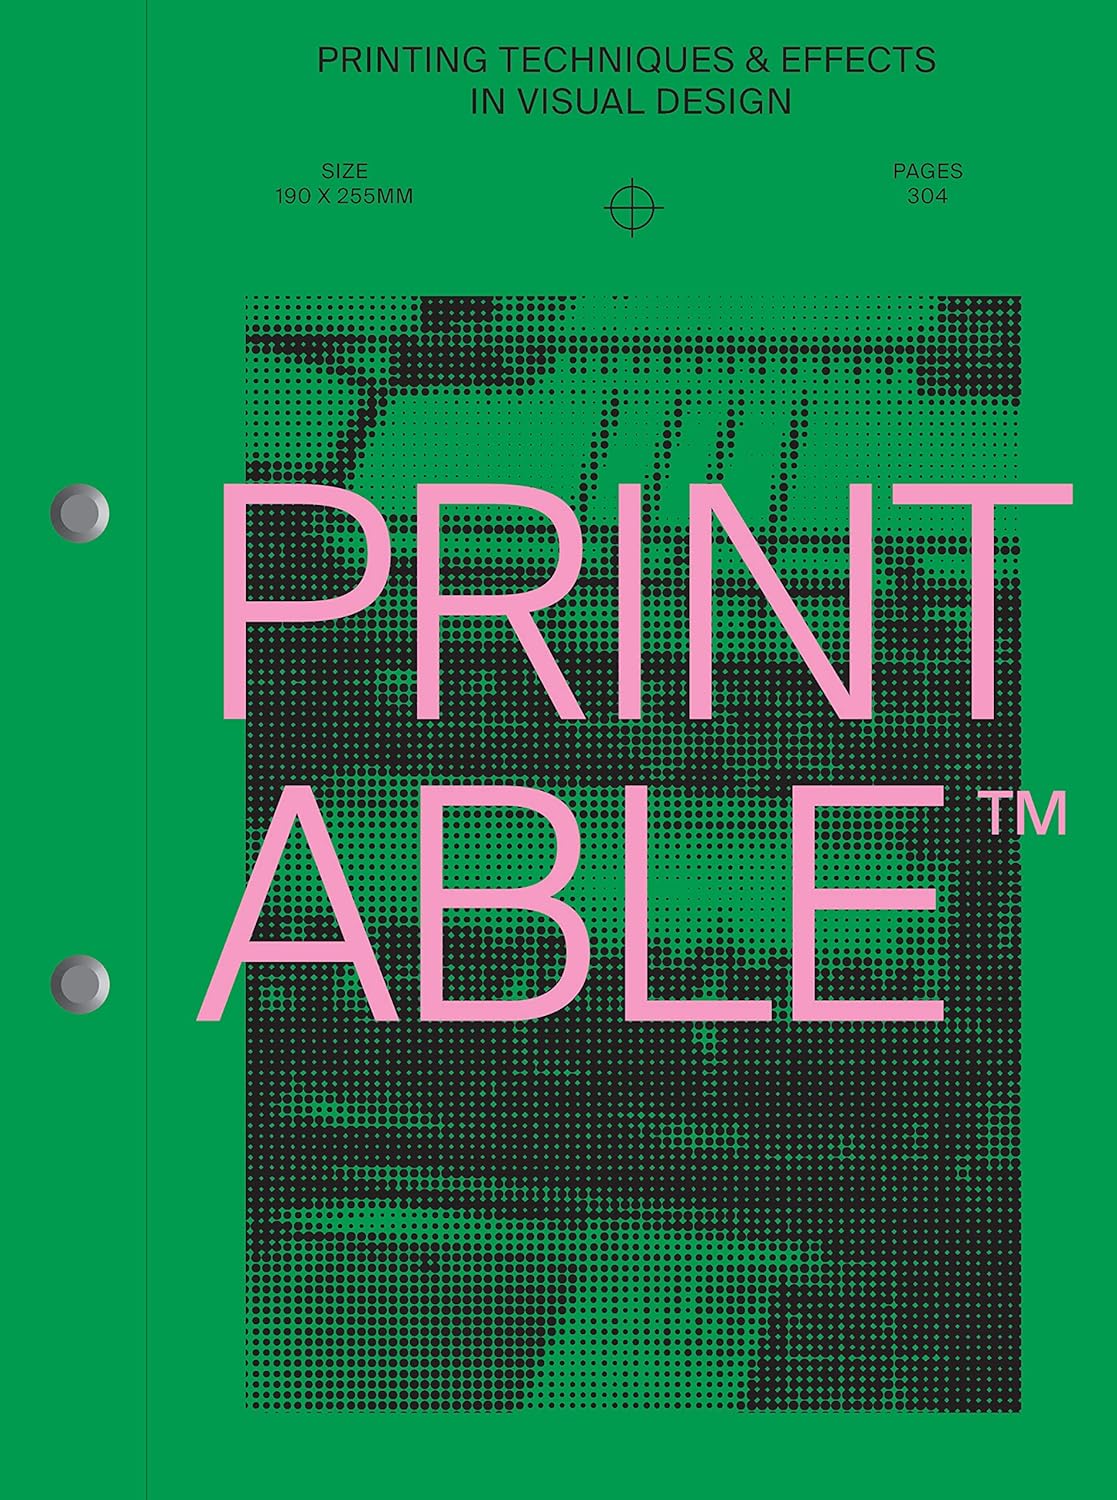 Printable. Printing techniques &amp; effects in visual design